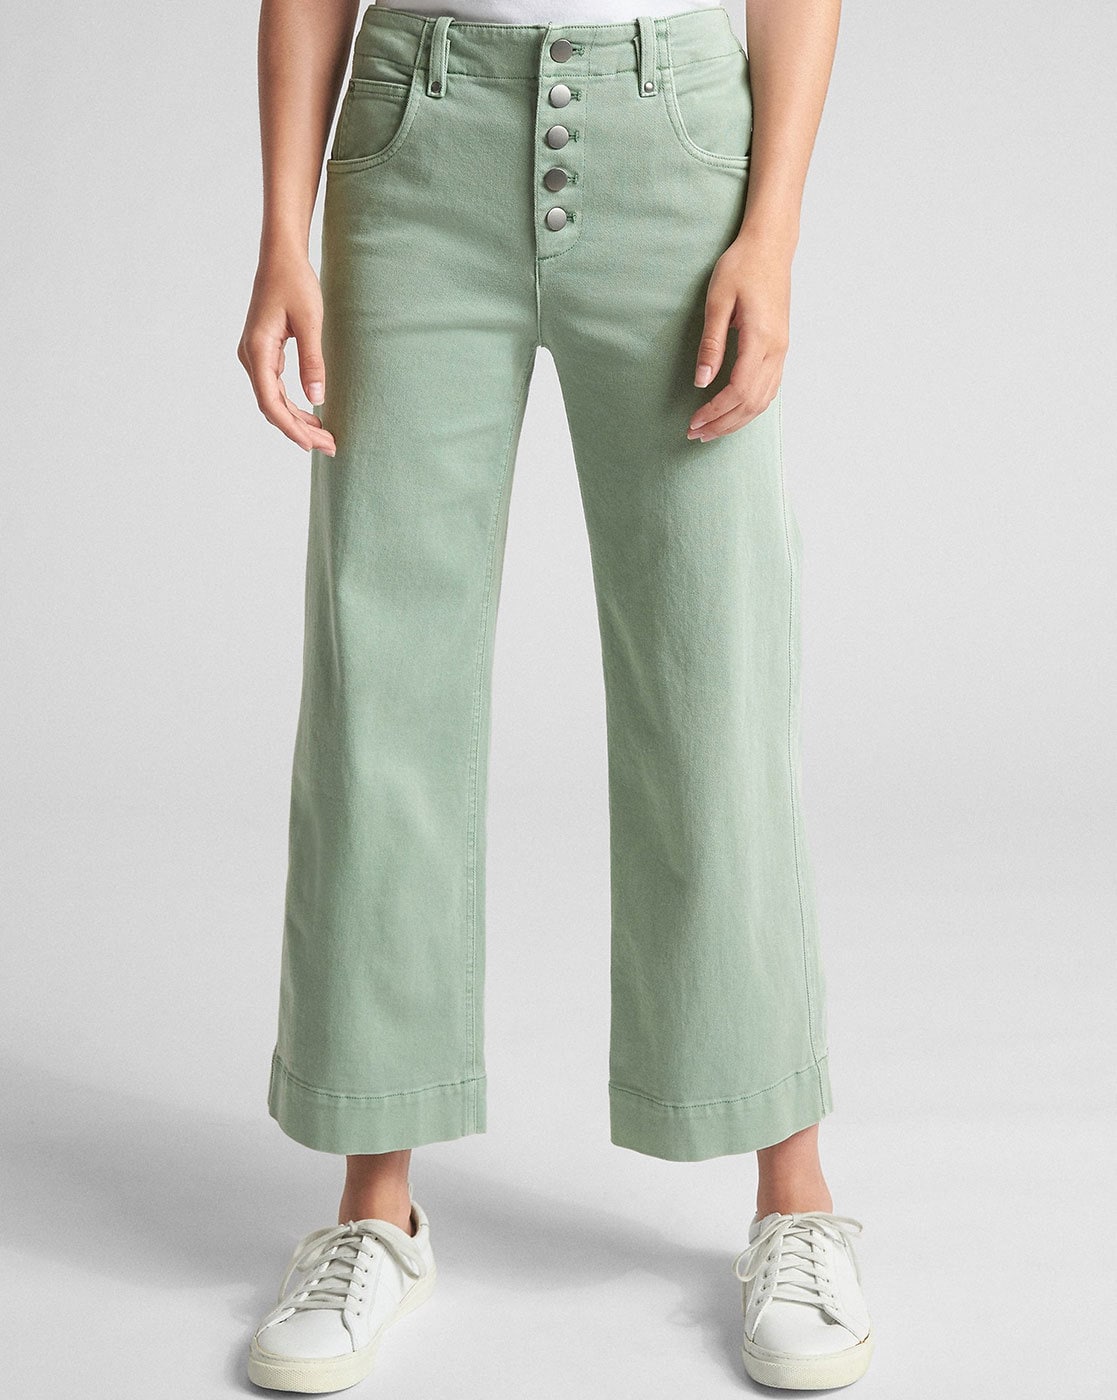 Buy Gap High Rise Pleated WideLeg Trouser from the Gap online shop